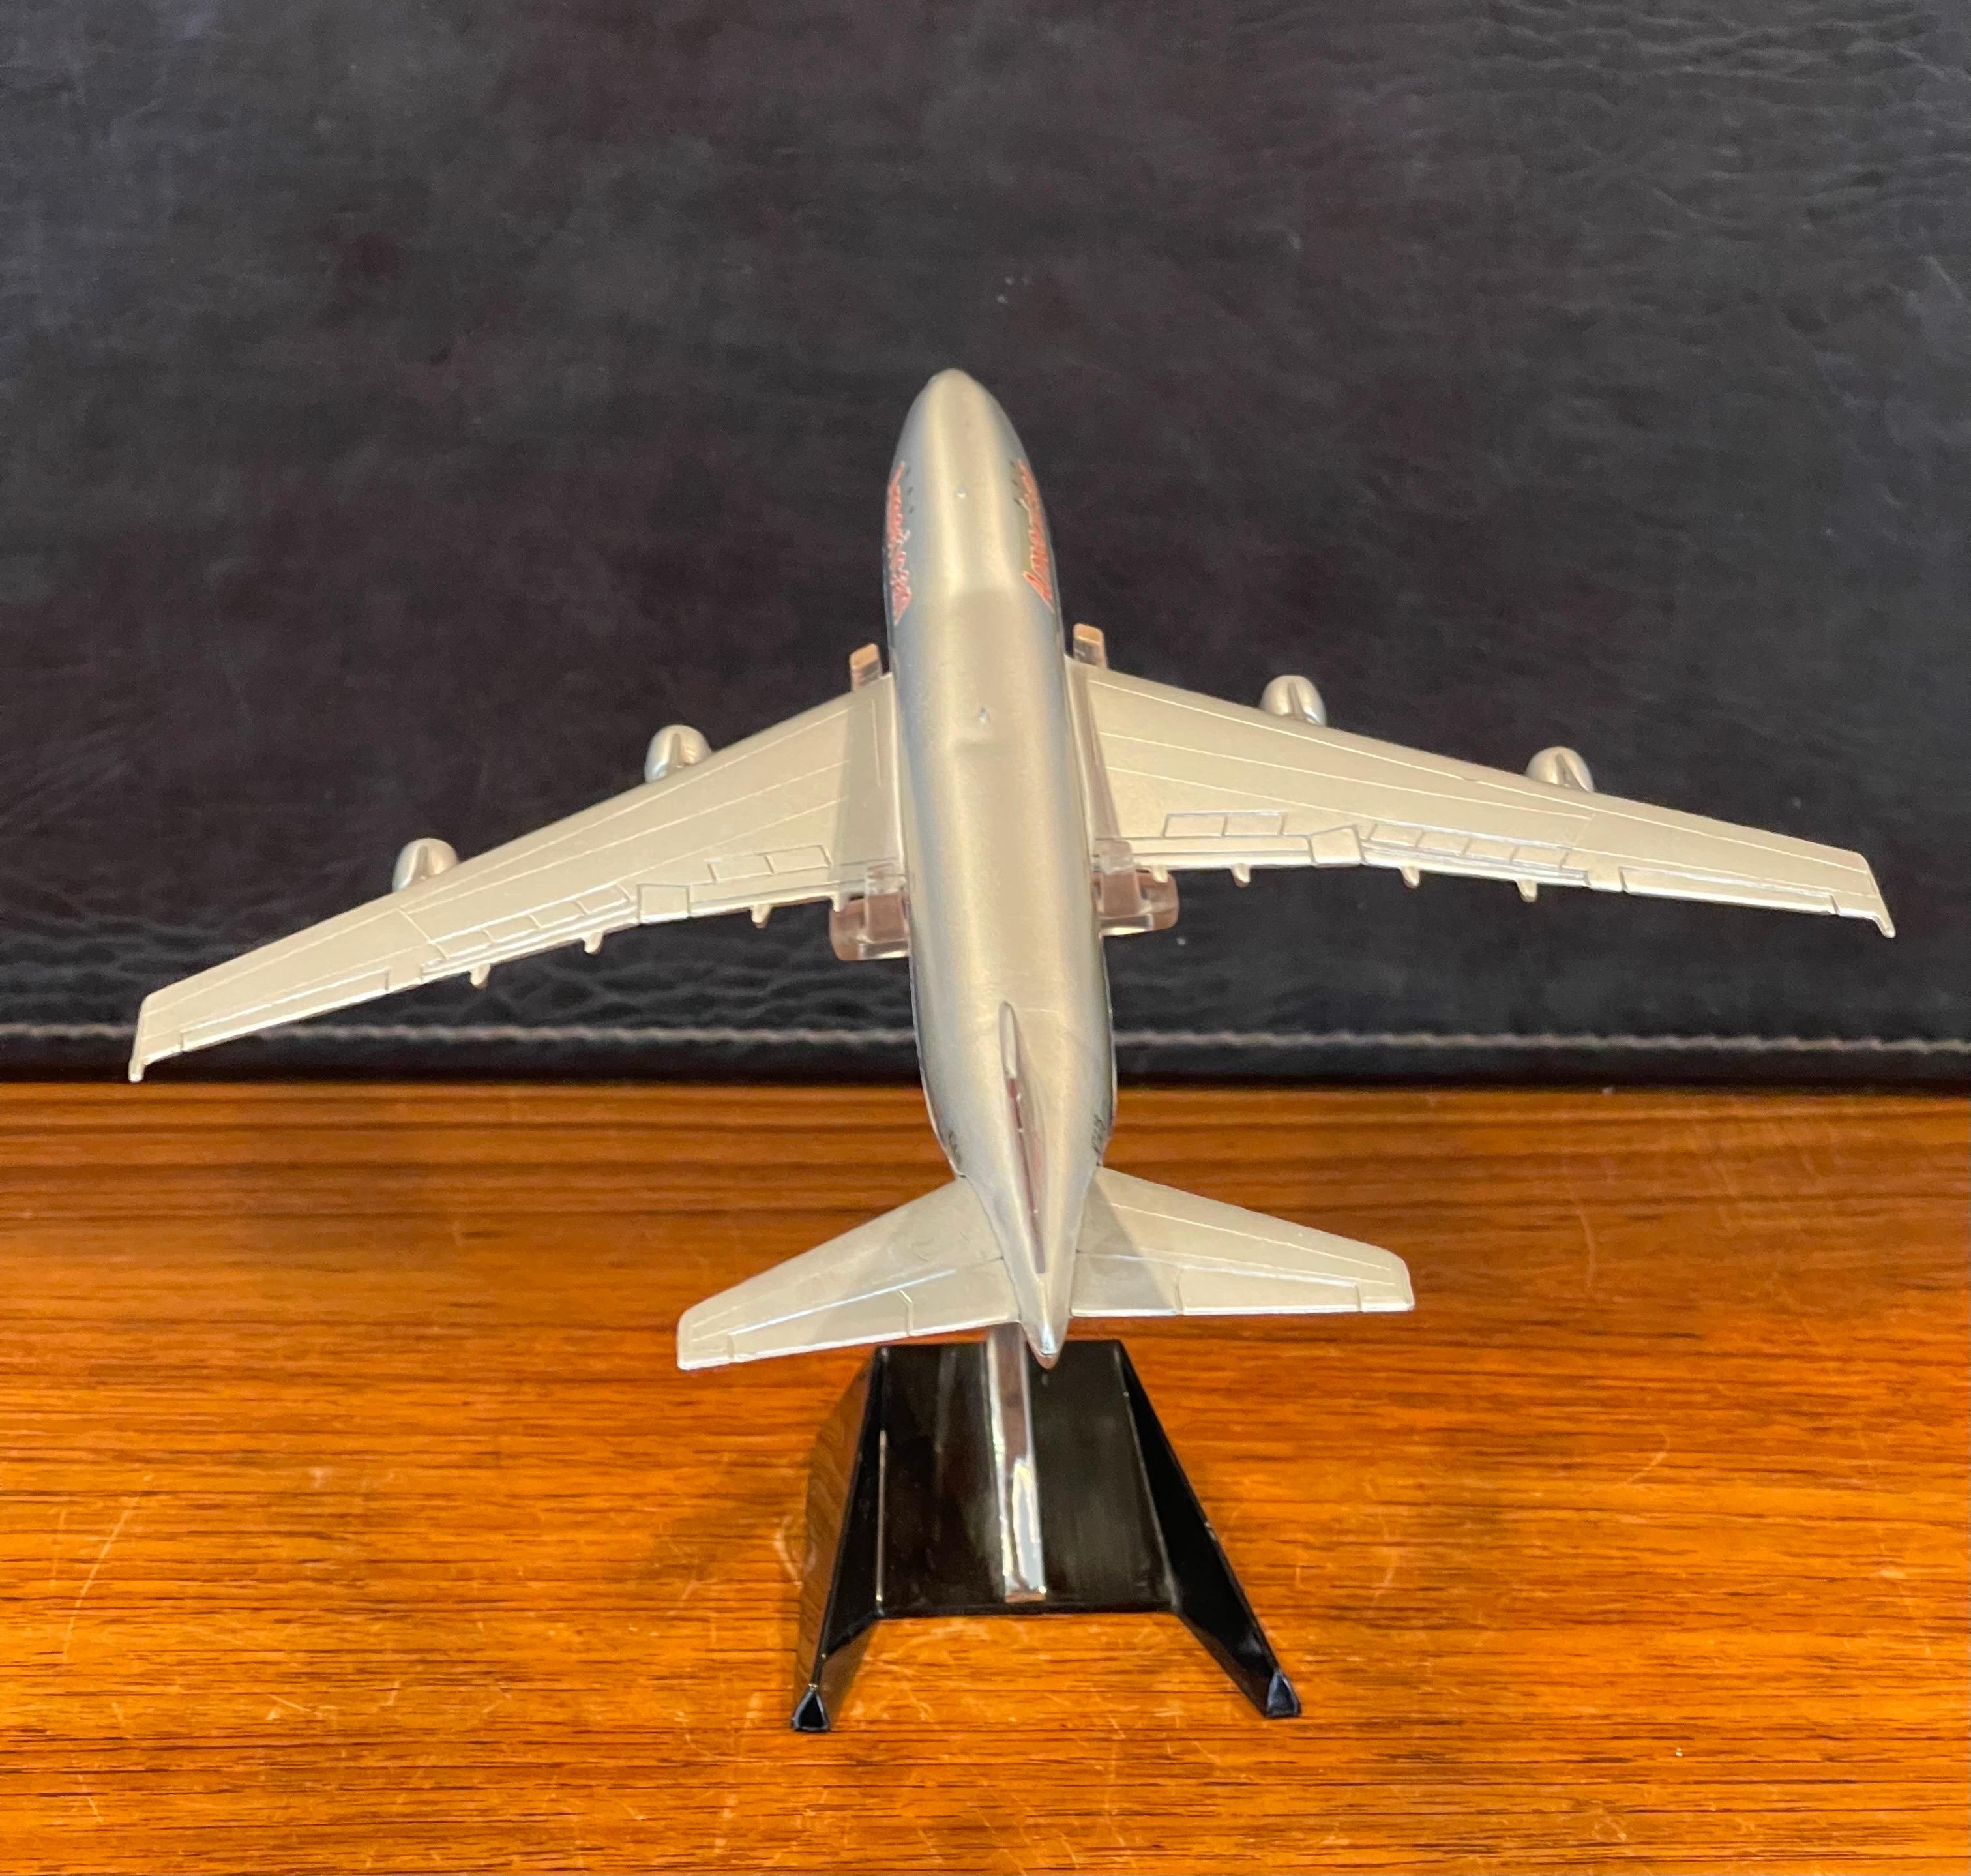 20th Century American Airlines Boeing 747 Jumbo Jetliner / Airplane Contractor Desk Model For Sale